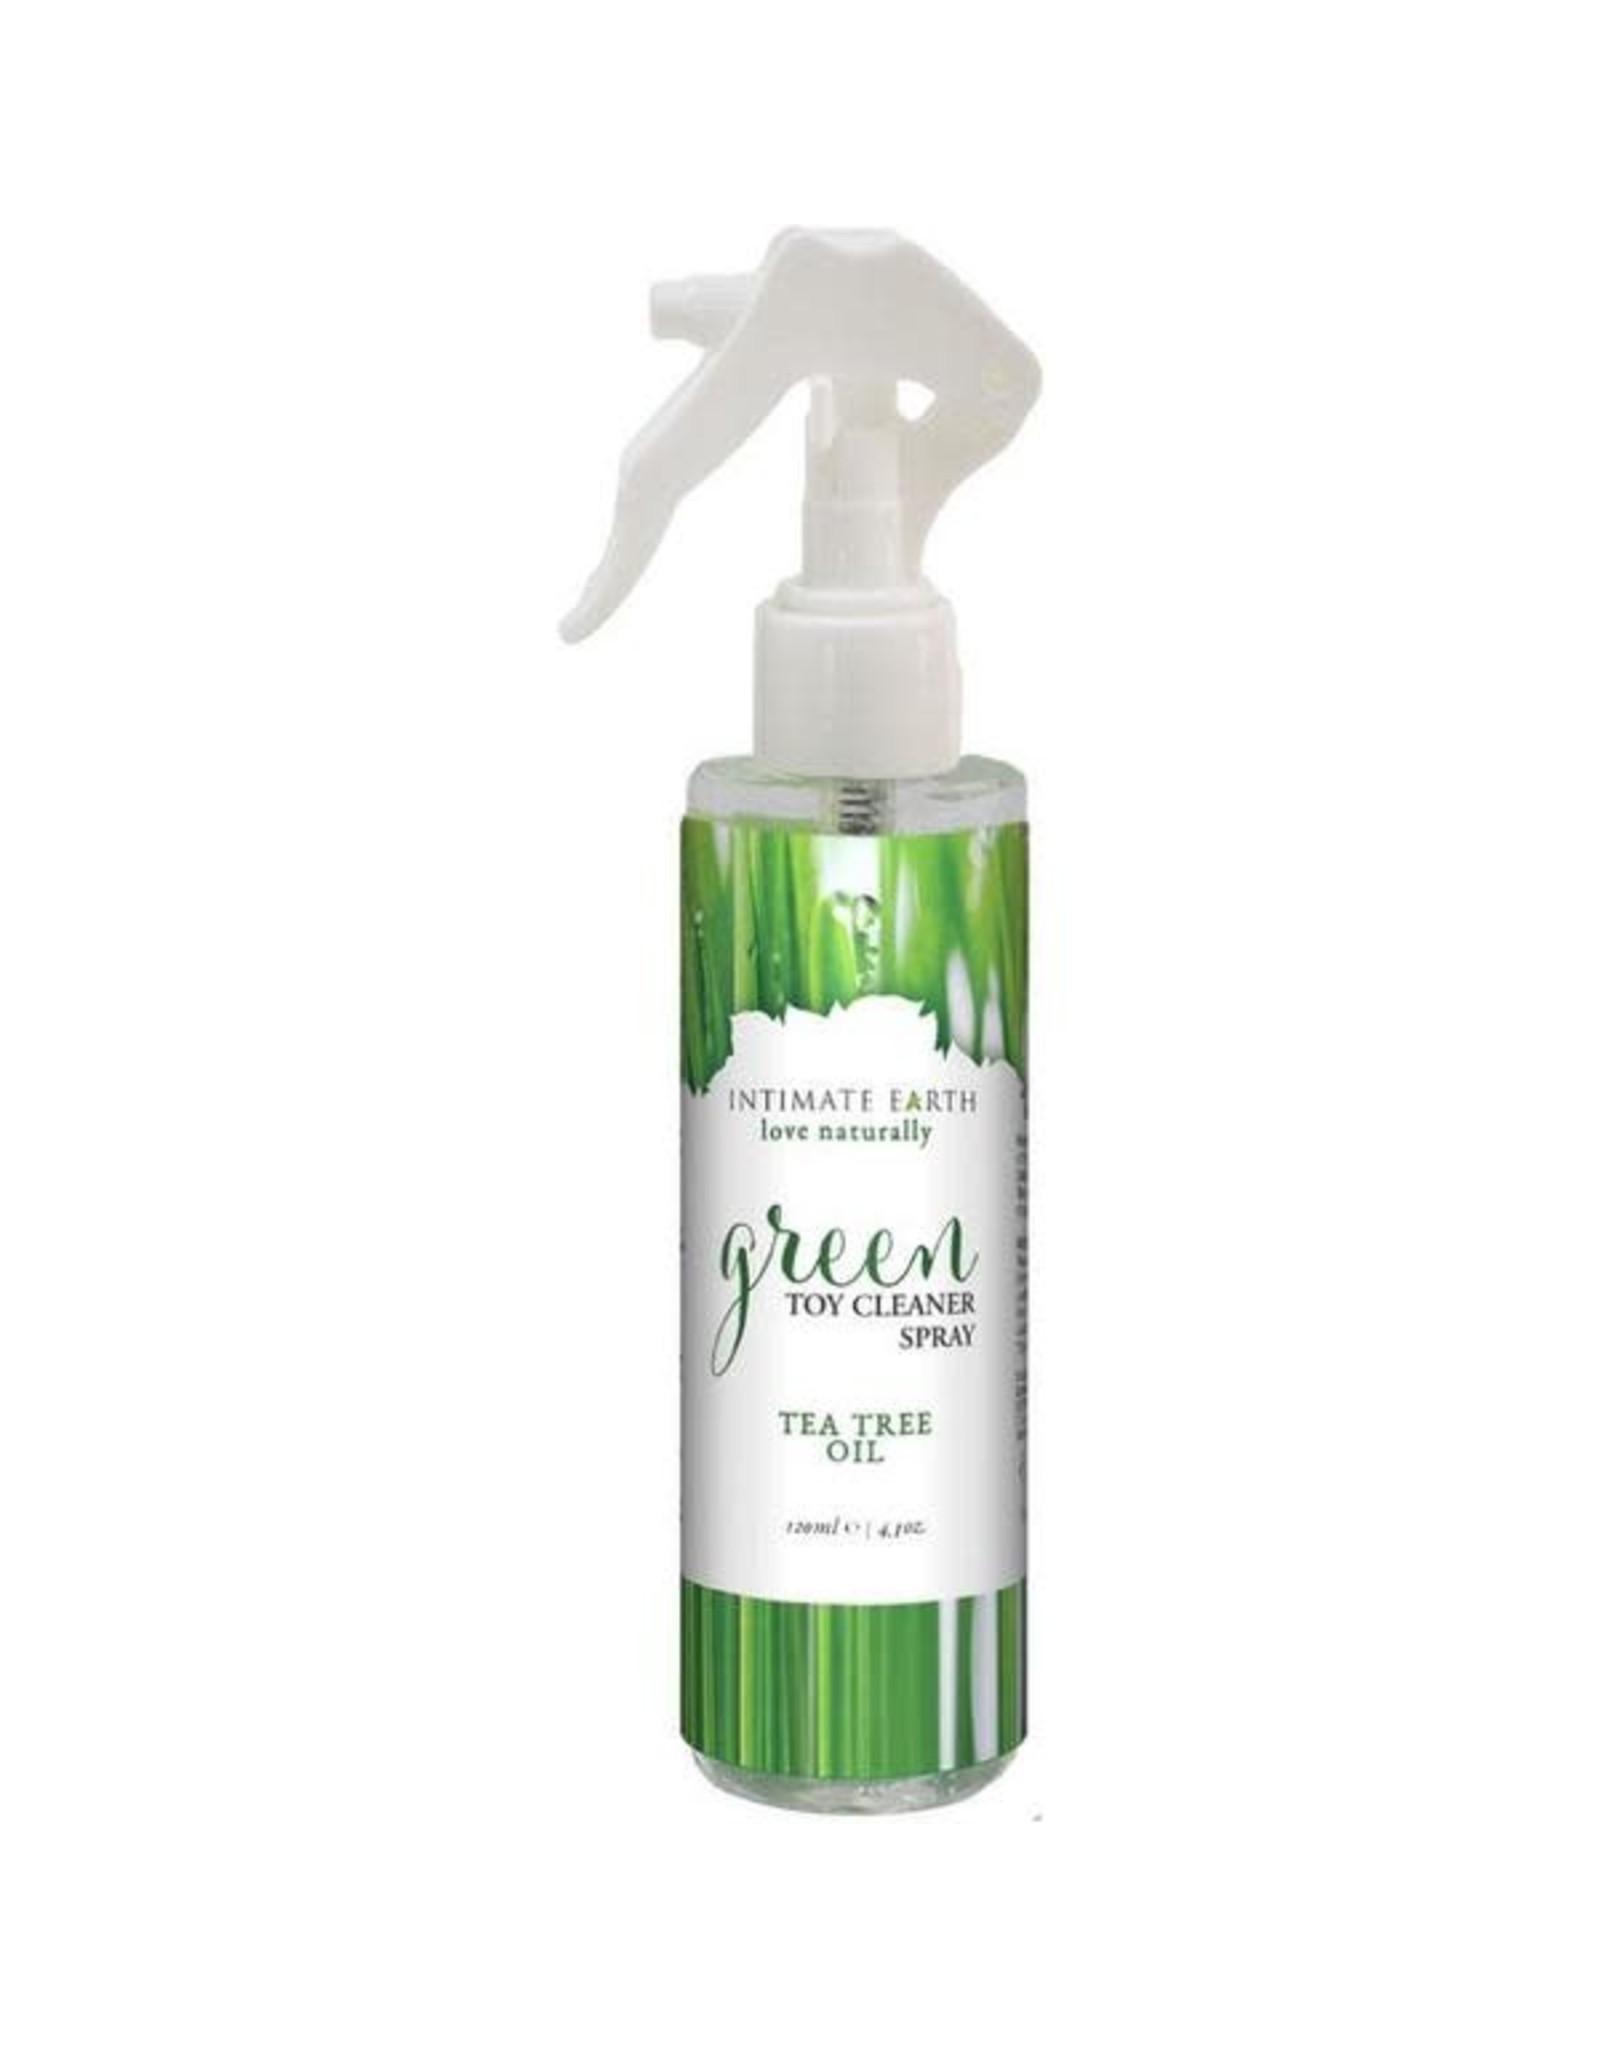 Intimate Earth - Green Spray Toy Cleaner (4 oz)